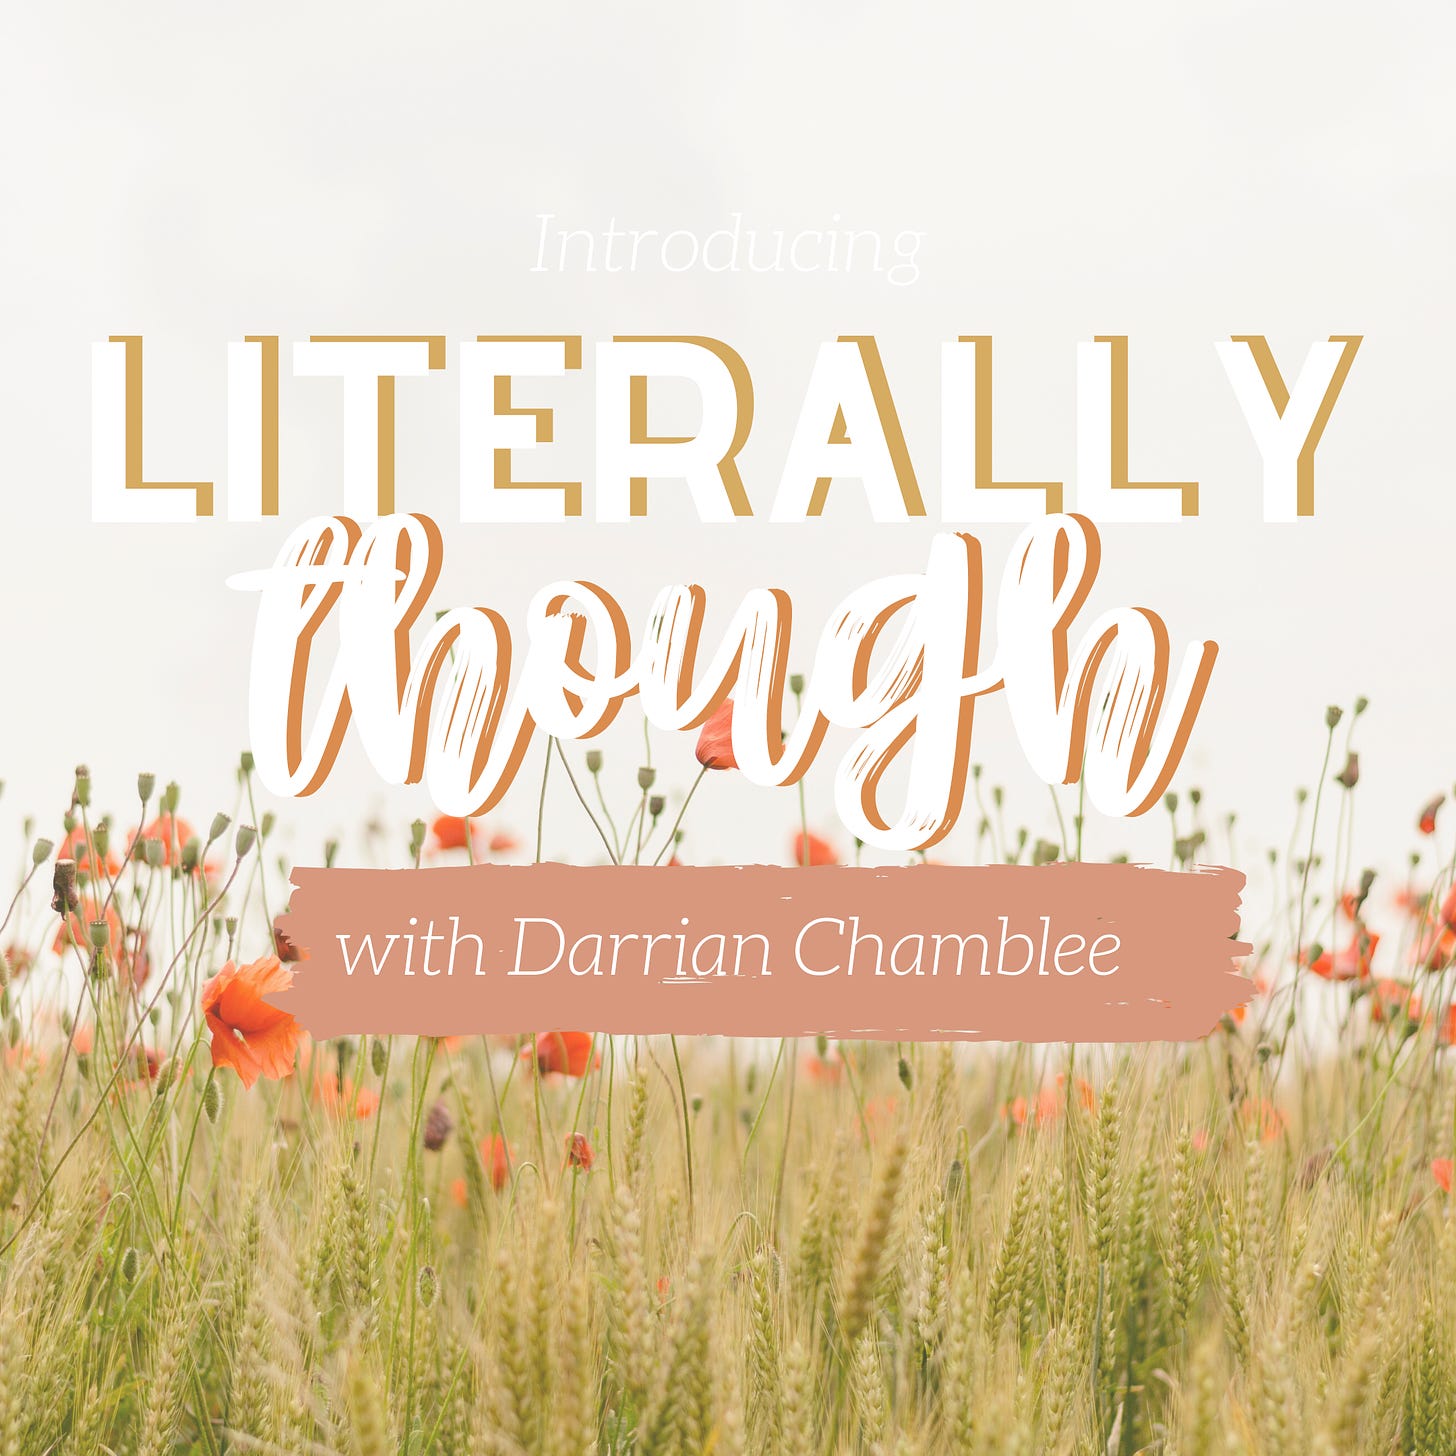 Introducing the Literally Though Podcast with Darrian Chamblee